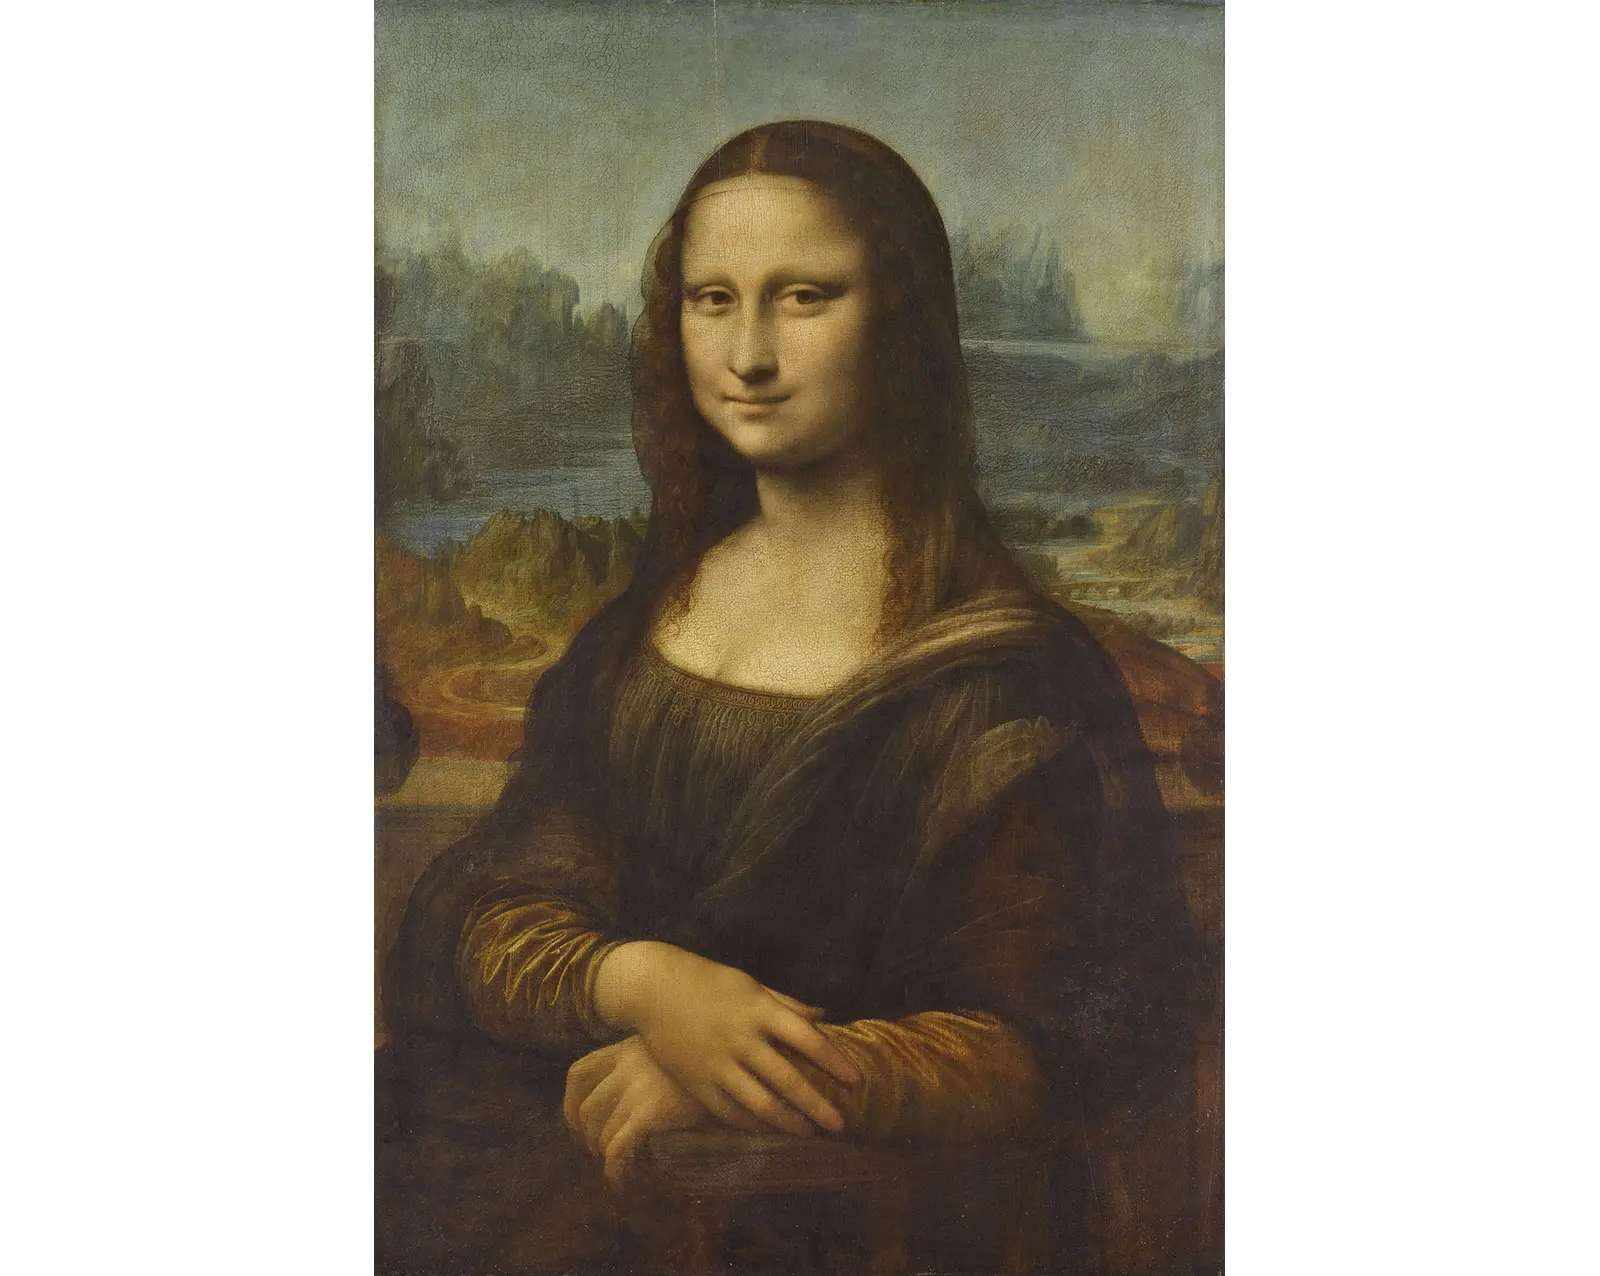 What Is So Special About The Mona Lisa?